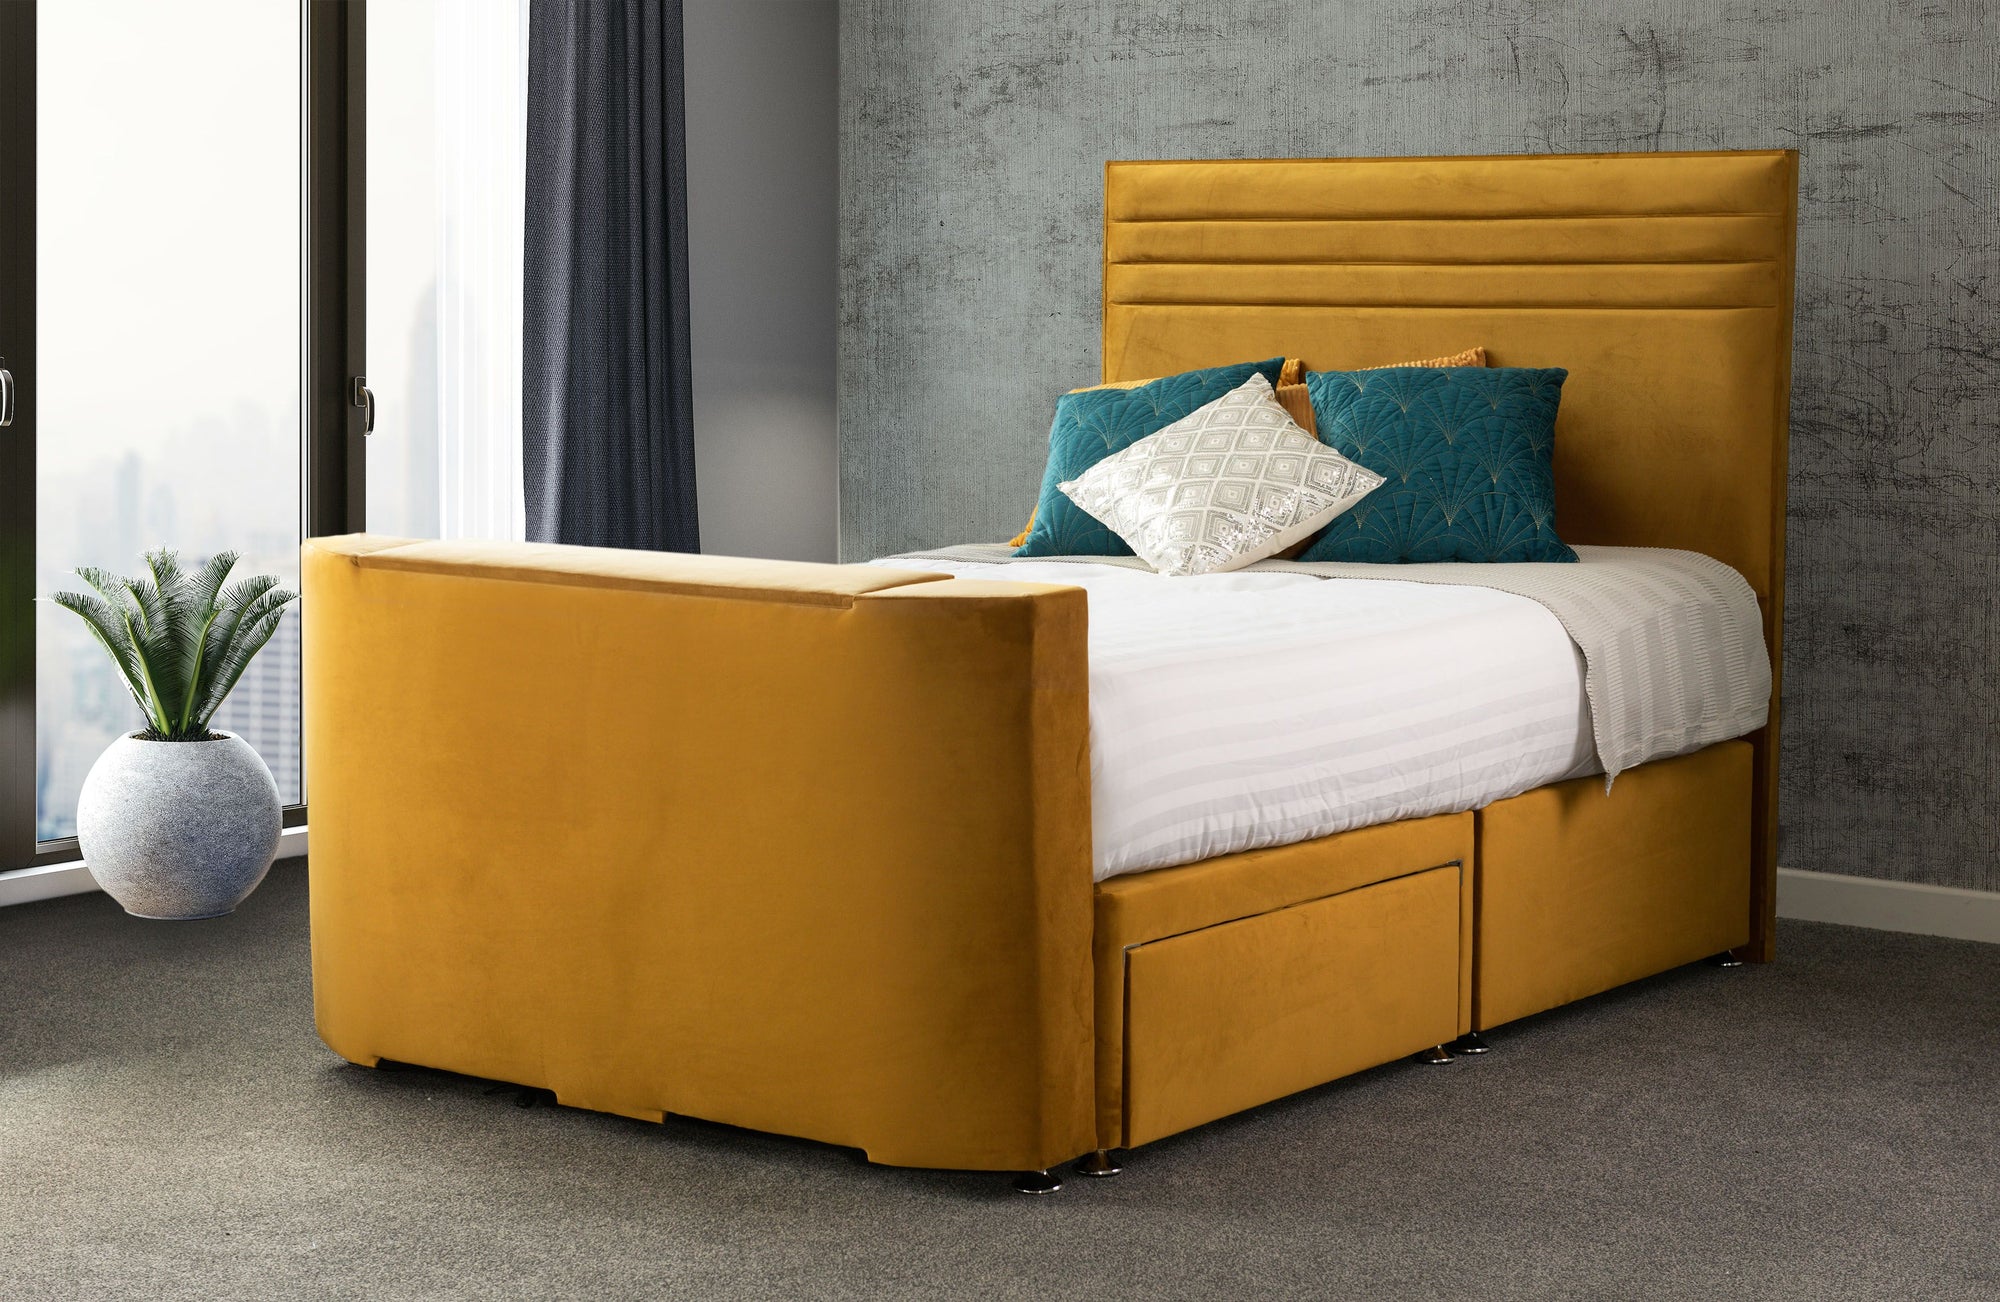 Sweet Dreams Vision Chic TV Bed - Beds on Legs Ltd